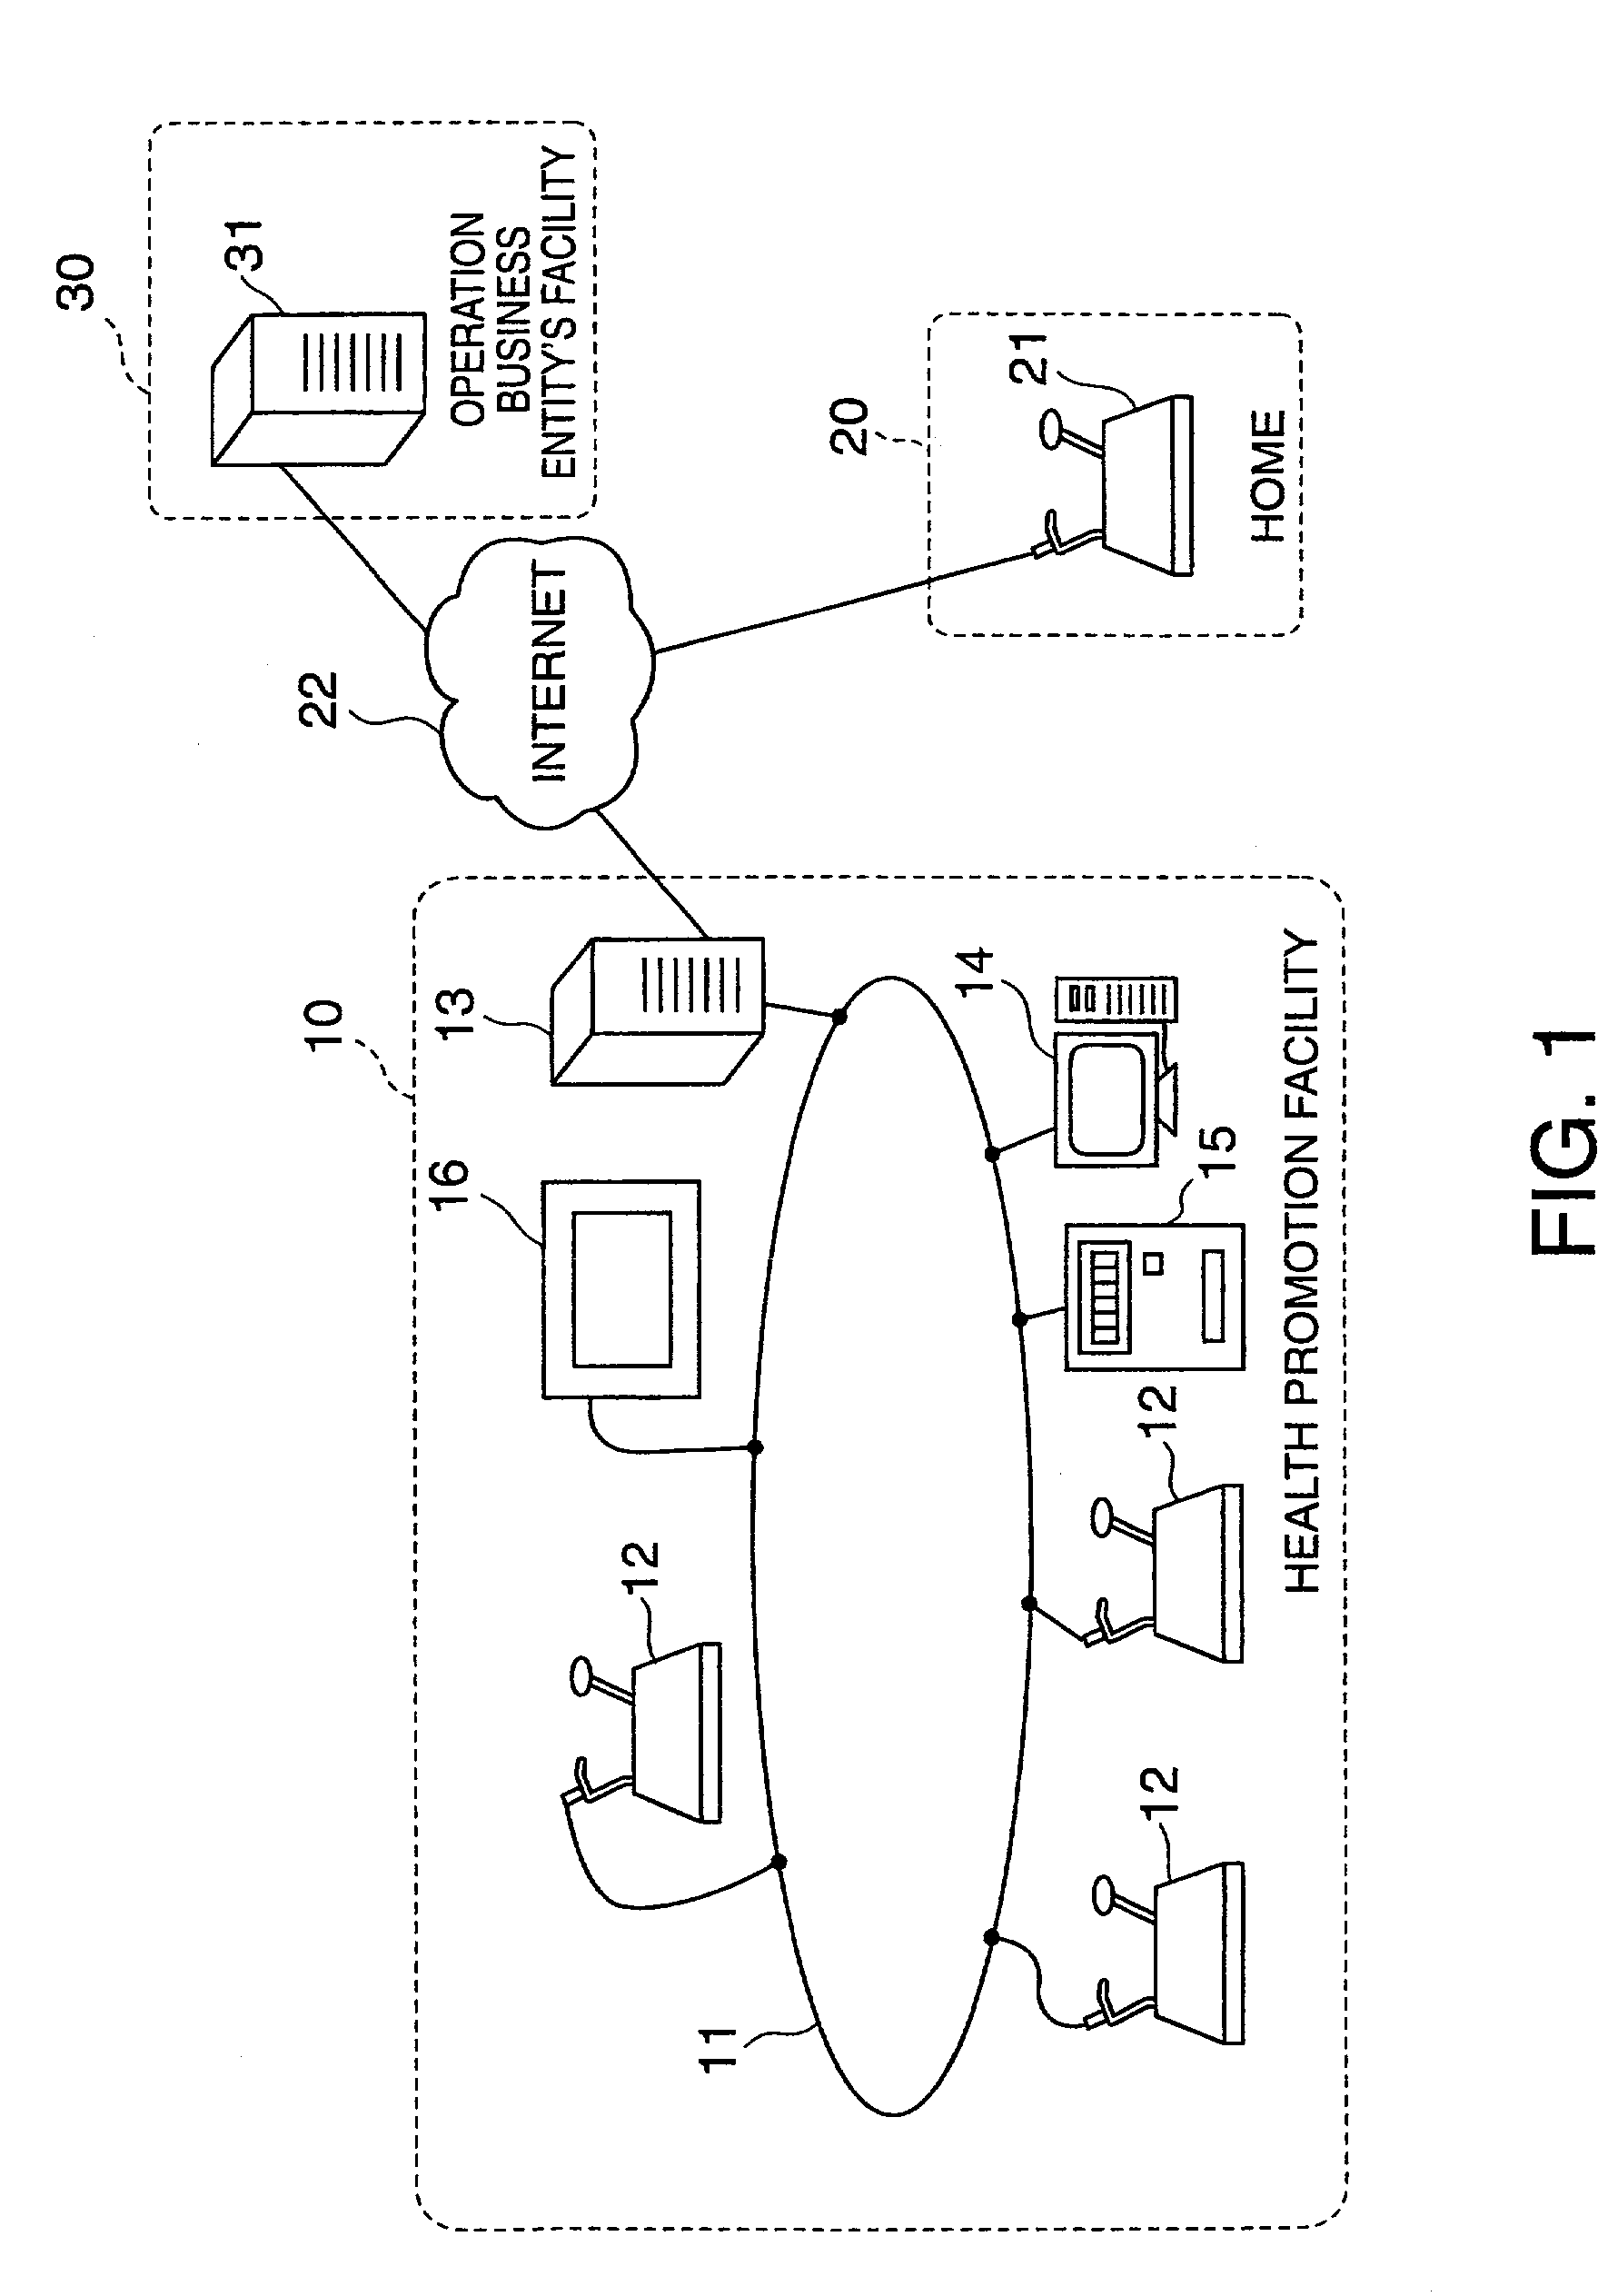 Physical training machine operation system and method